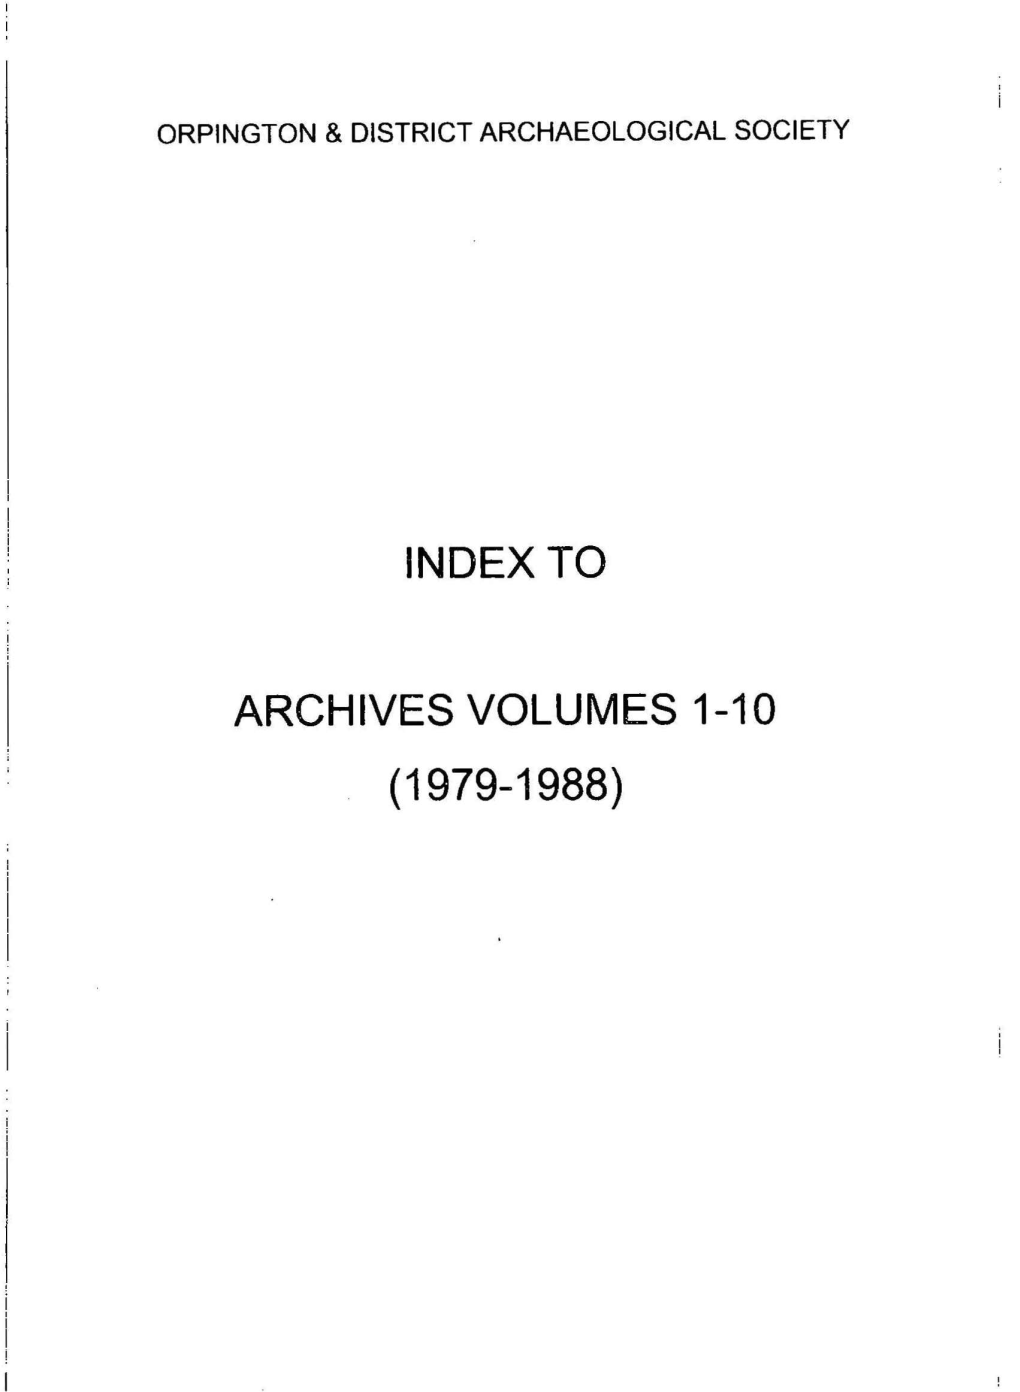 Index Archives 1-10 1979 to 1988